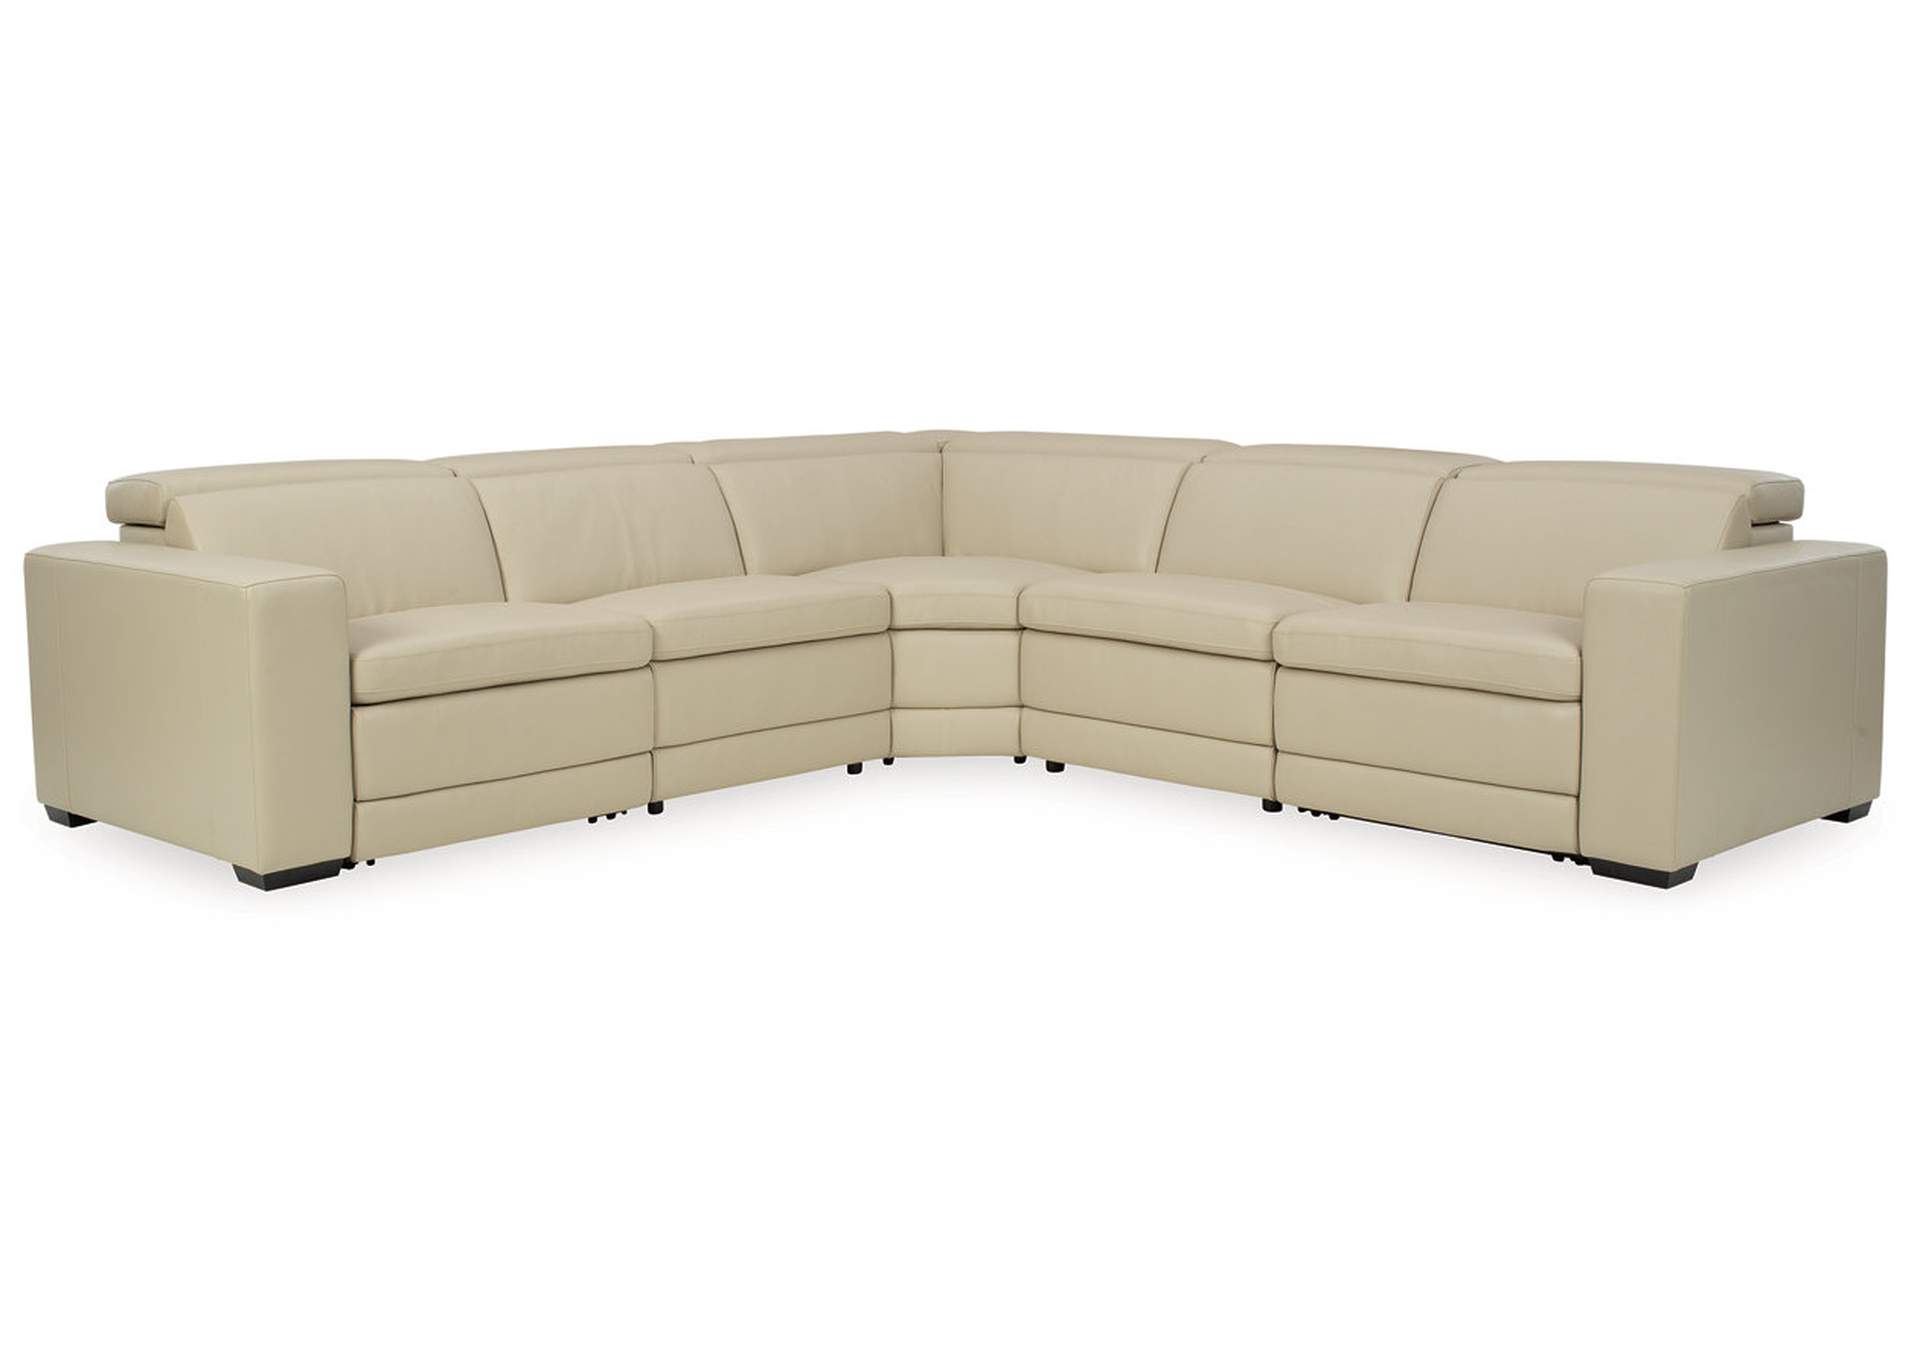 Texline 6-Piece Power Reclining Sectional,Signature Design By Ashley